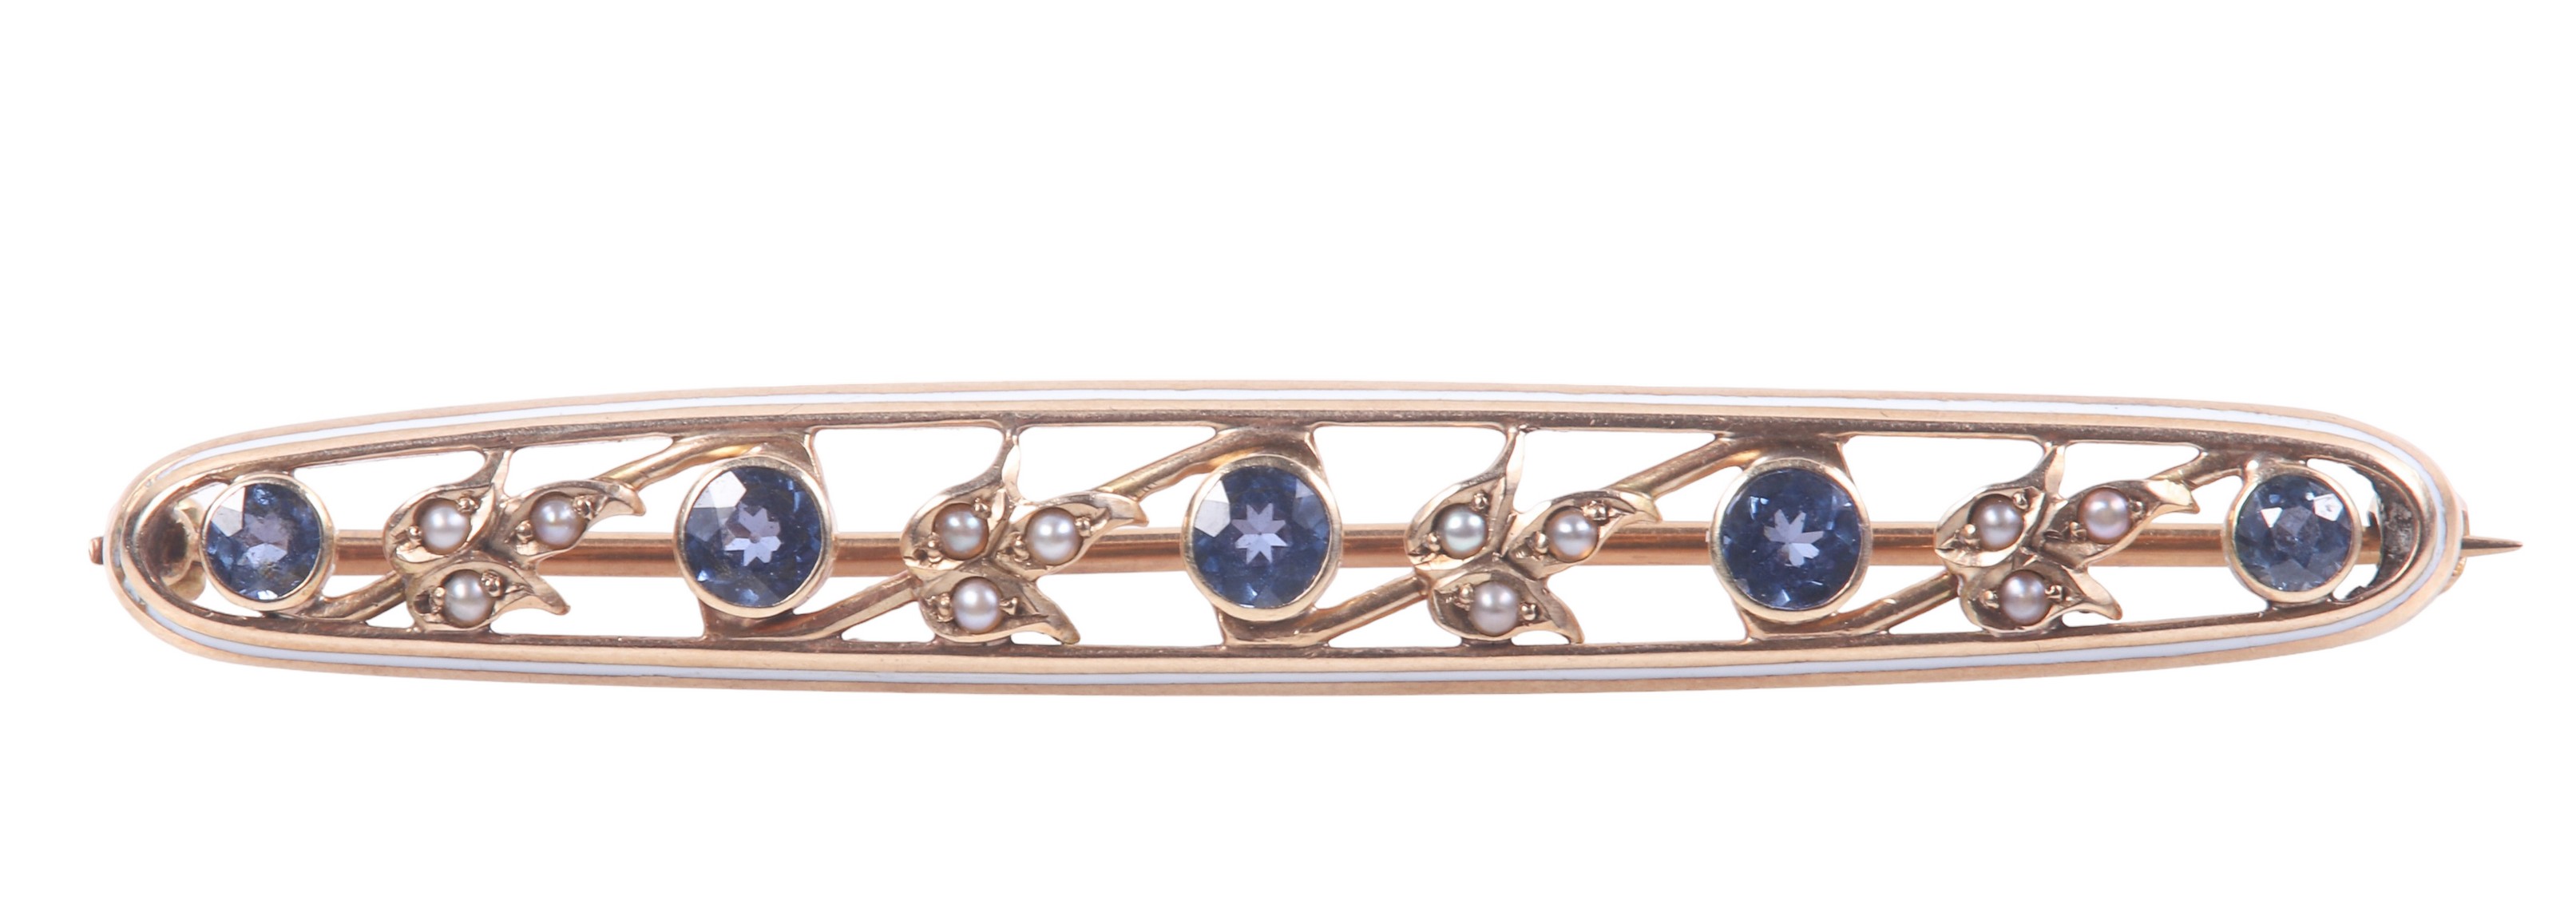 14K sapphire and seed pearl brooch,